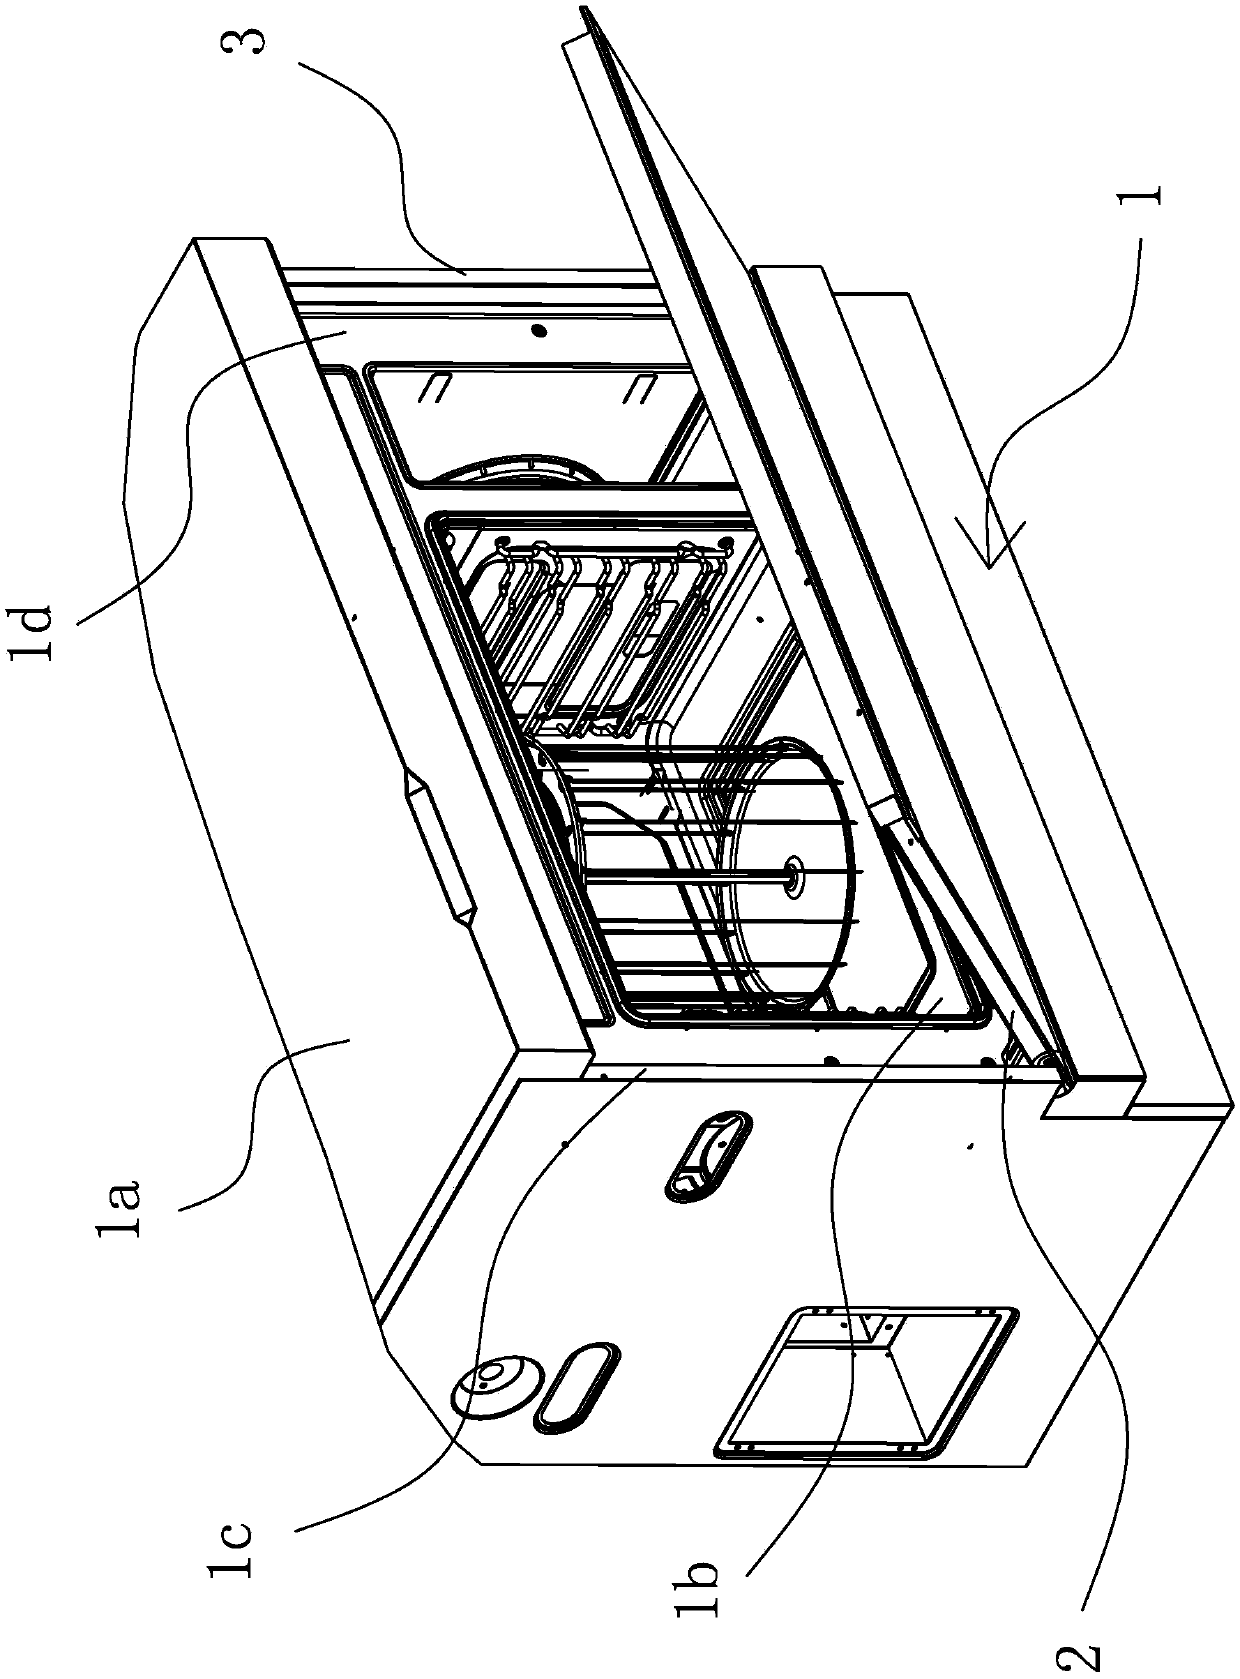 Integrated cooker with oven